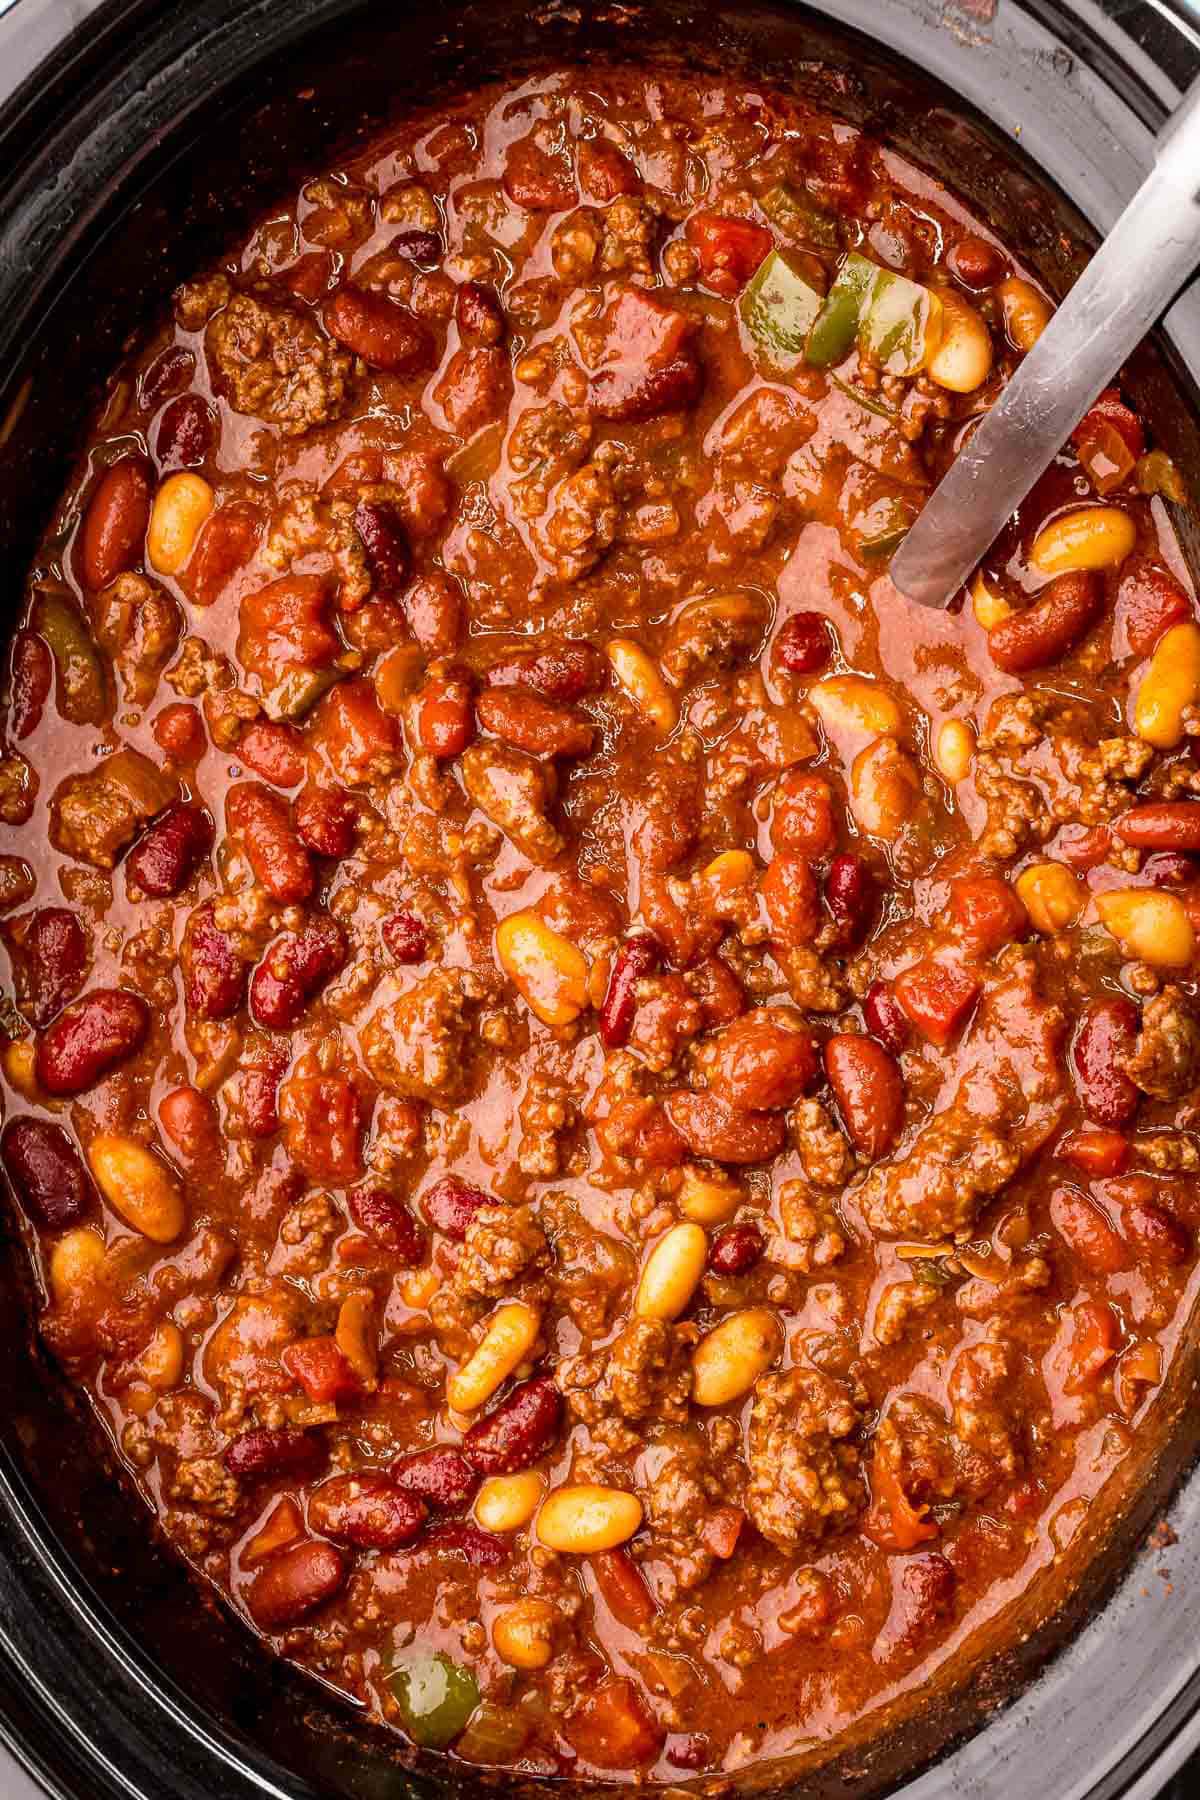 Slow Cooker Chili after cooking